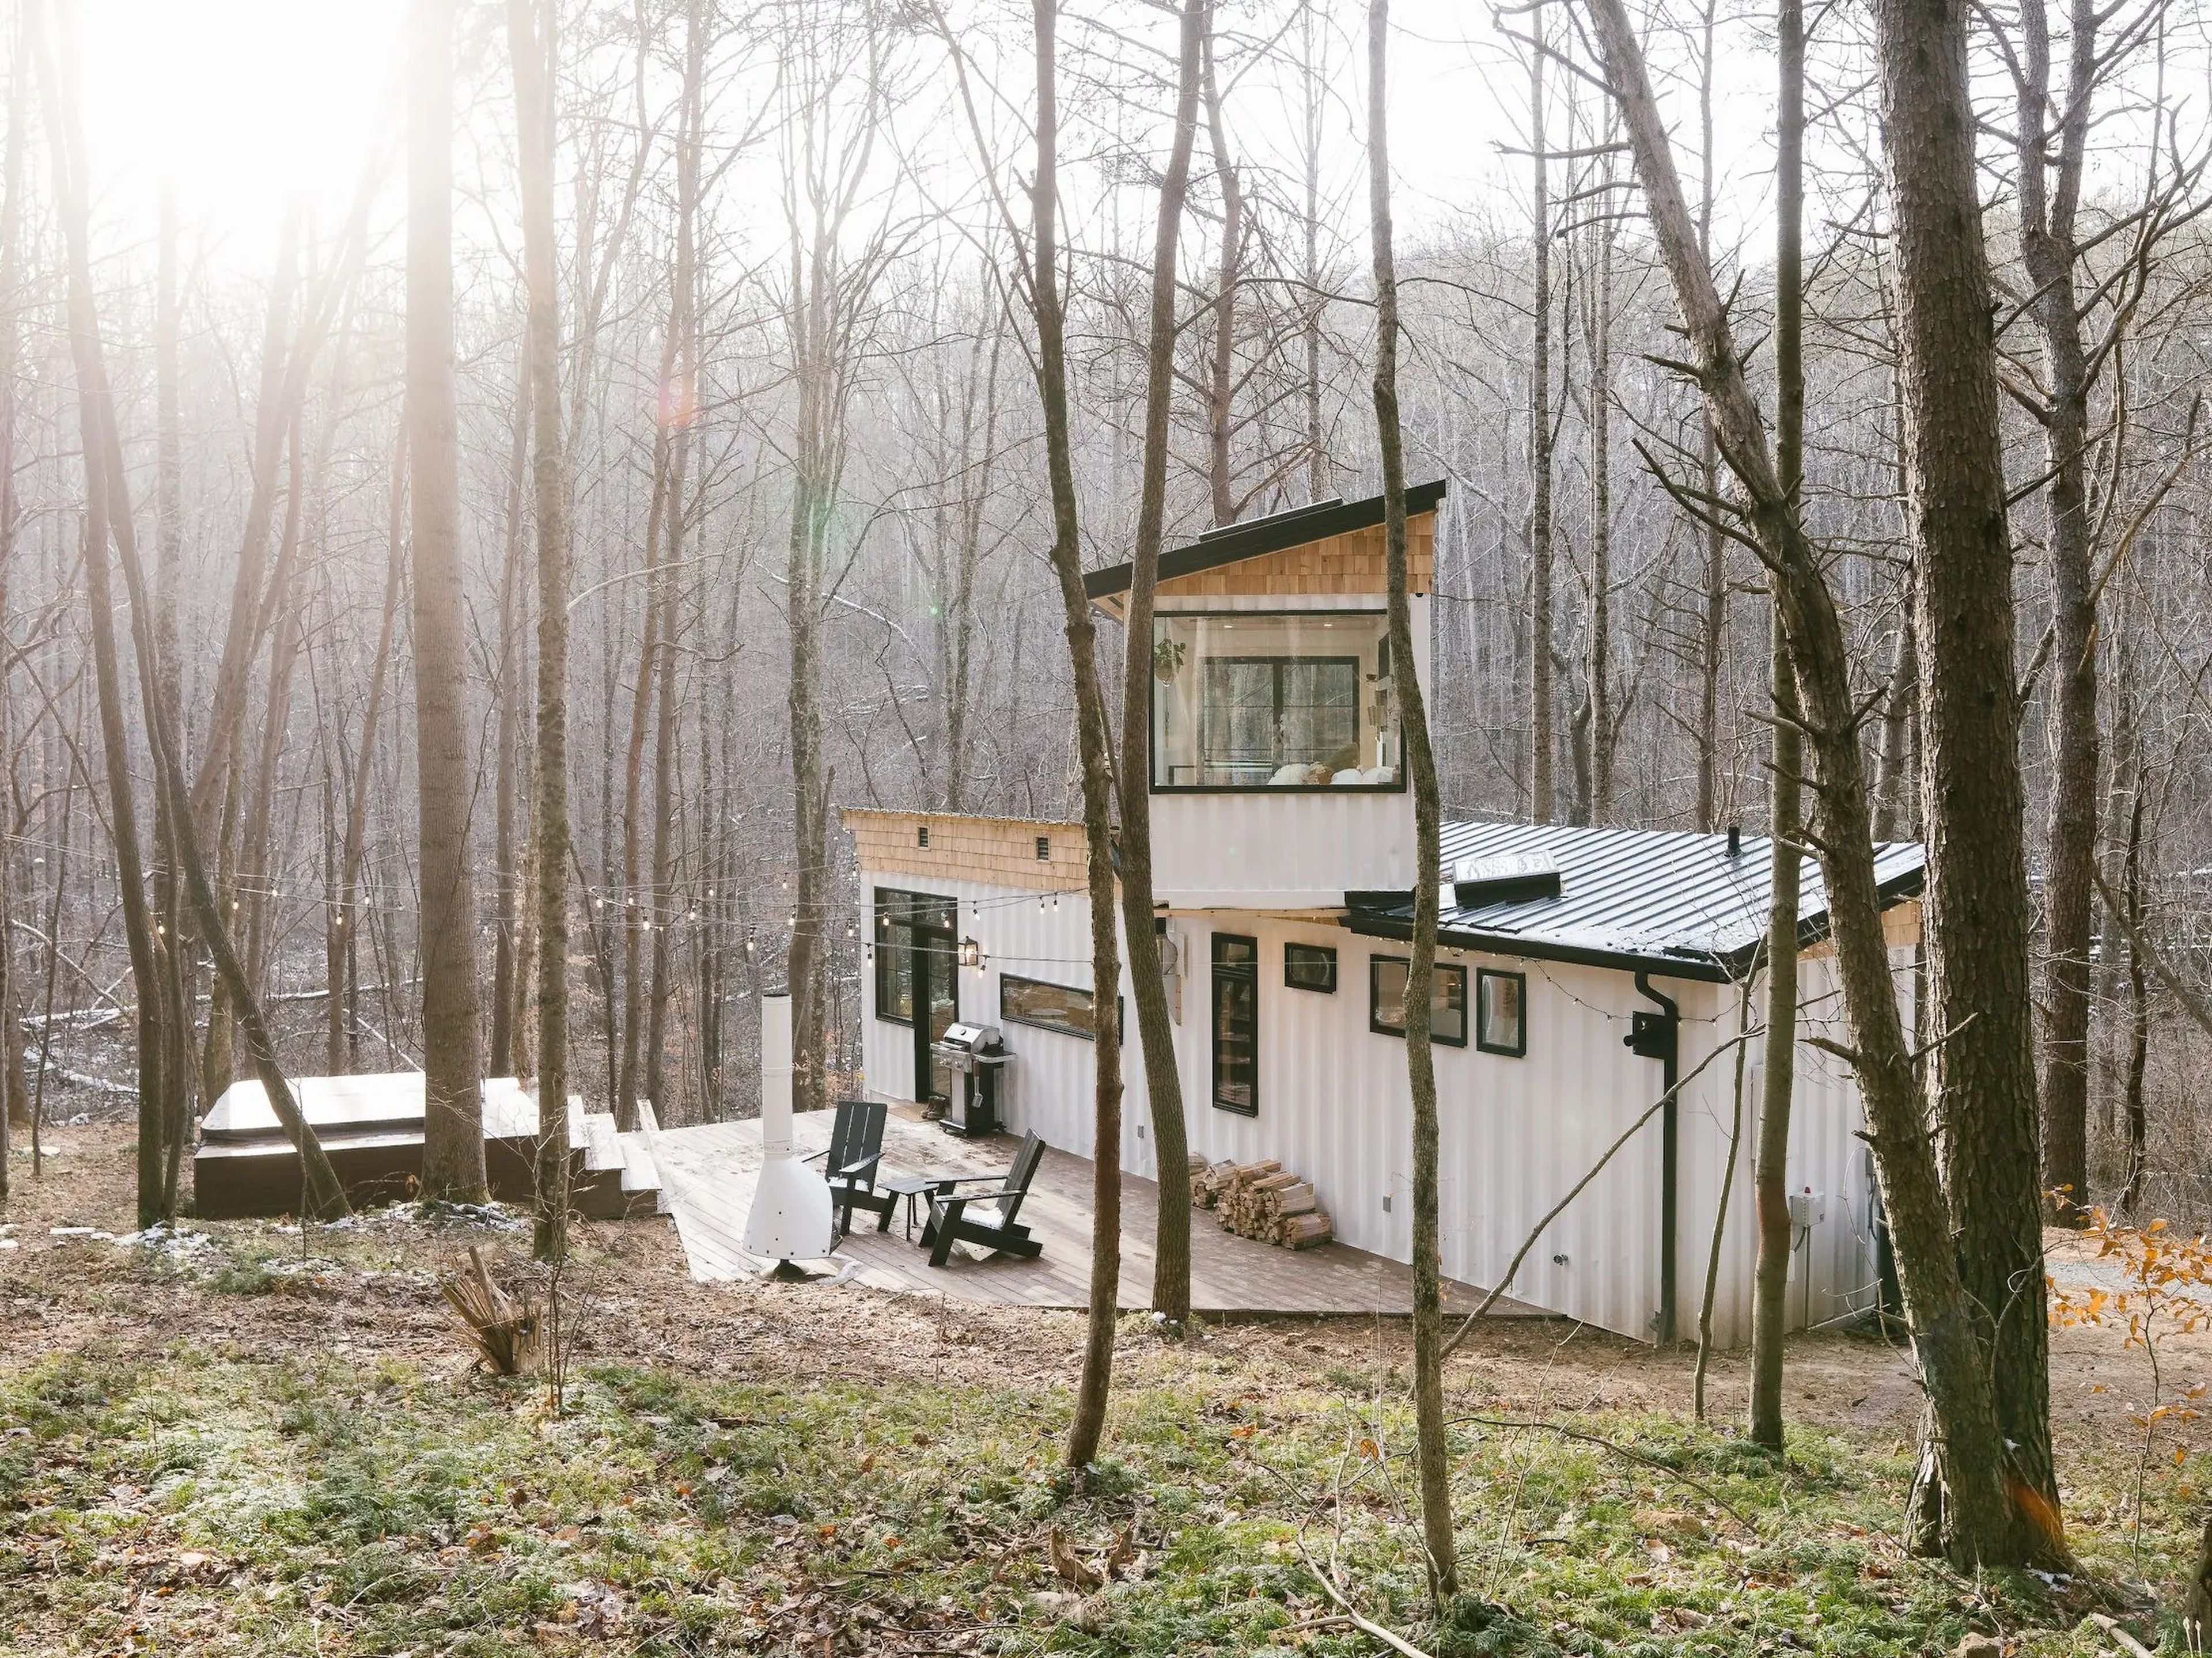 A shipping container home surrounded by trees and grass.